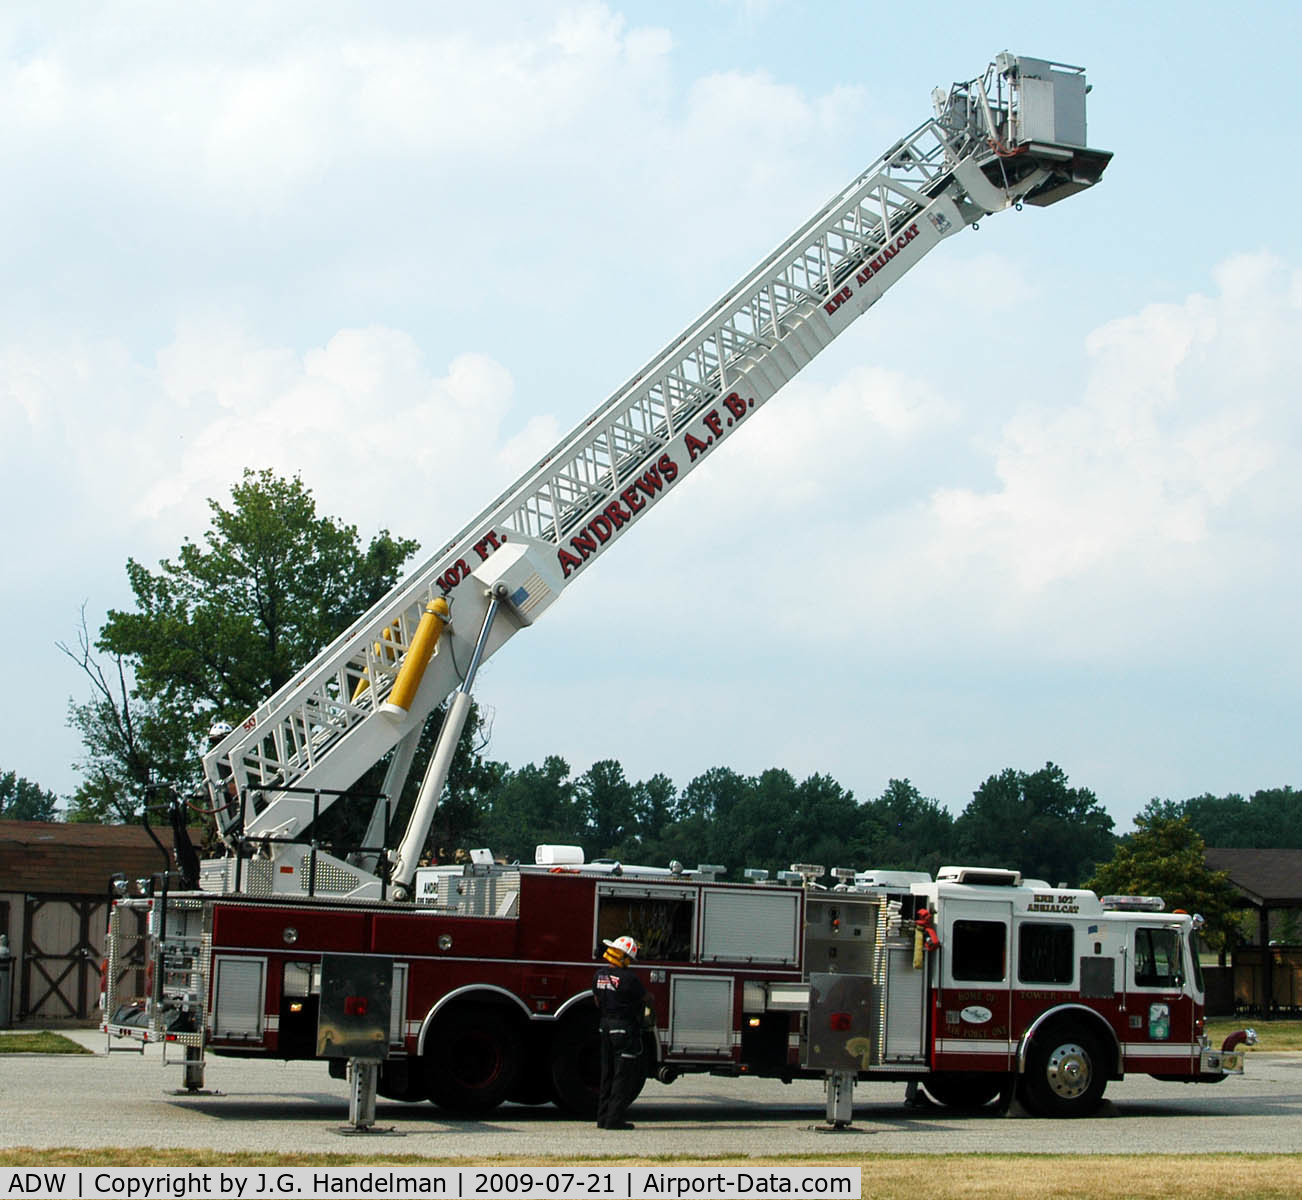 Joint Base Andrews Airport (ADW) - fire truck at Andrews AFB